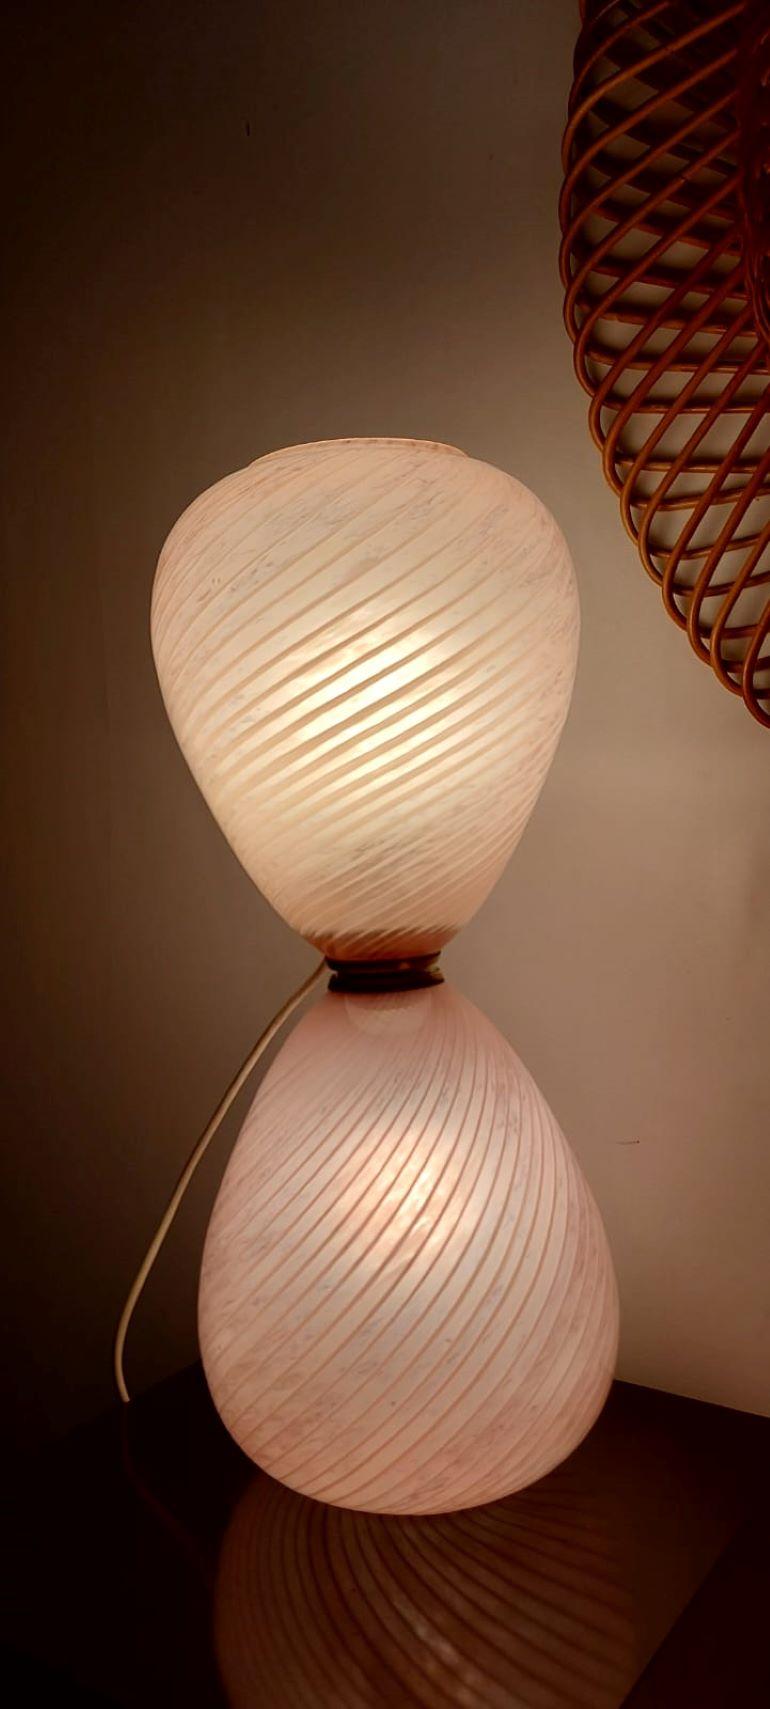 Pink Pale Blown Glass Murano Hourglass Table Lamp.
The hand blown glass has a torchon and ribbed effect.
The lamp has two light bulbs one on the top and one at the bottom which can be switched on alternately